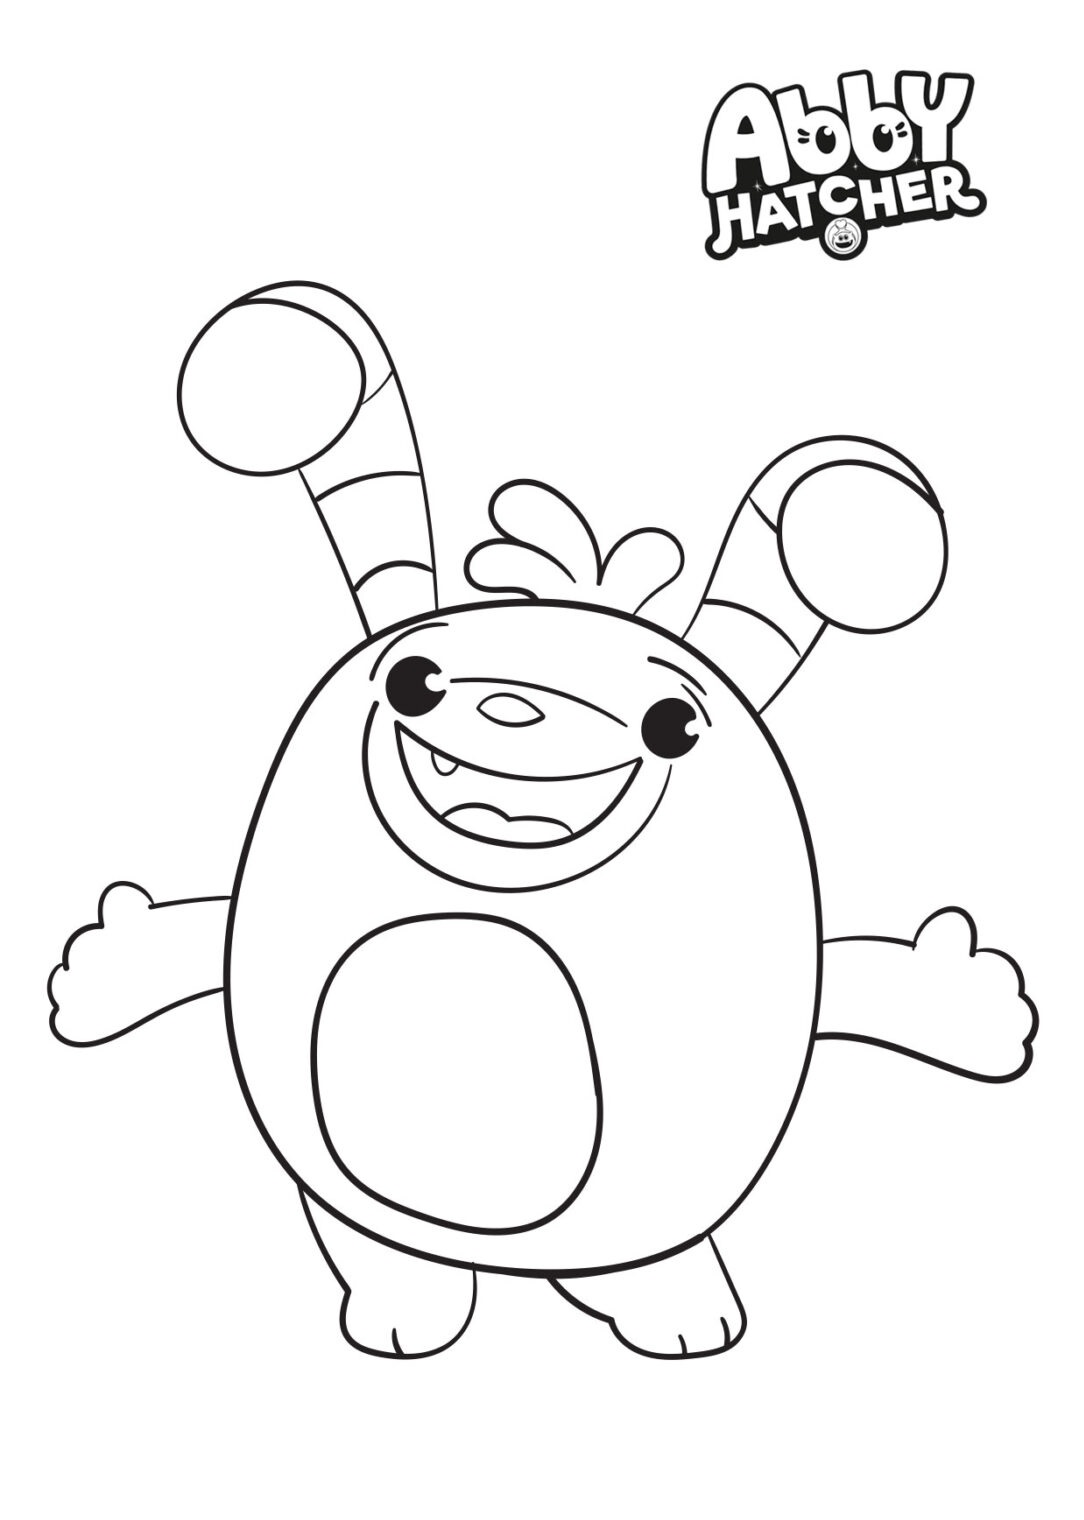 Printable Abby Hatcher Coloring Pages Pdf For Kids - Abby Hatcher Bozzly Coloring Page